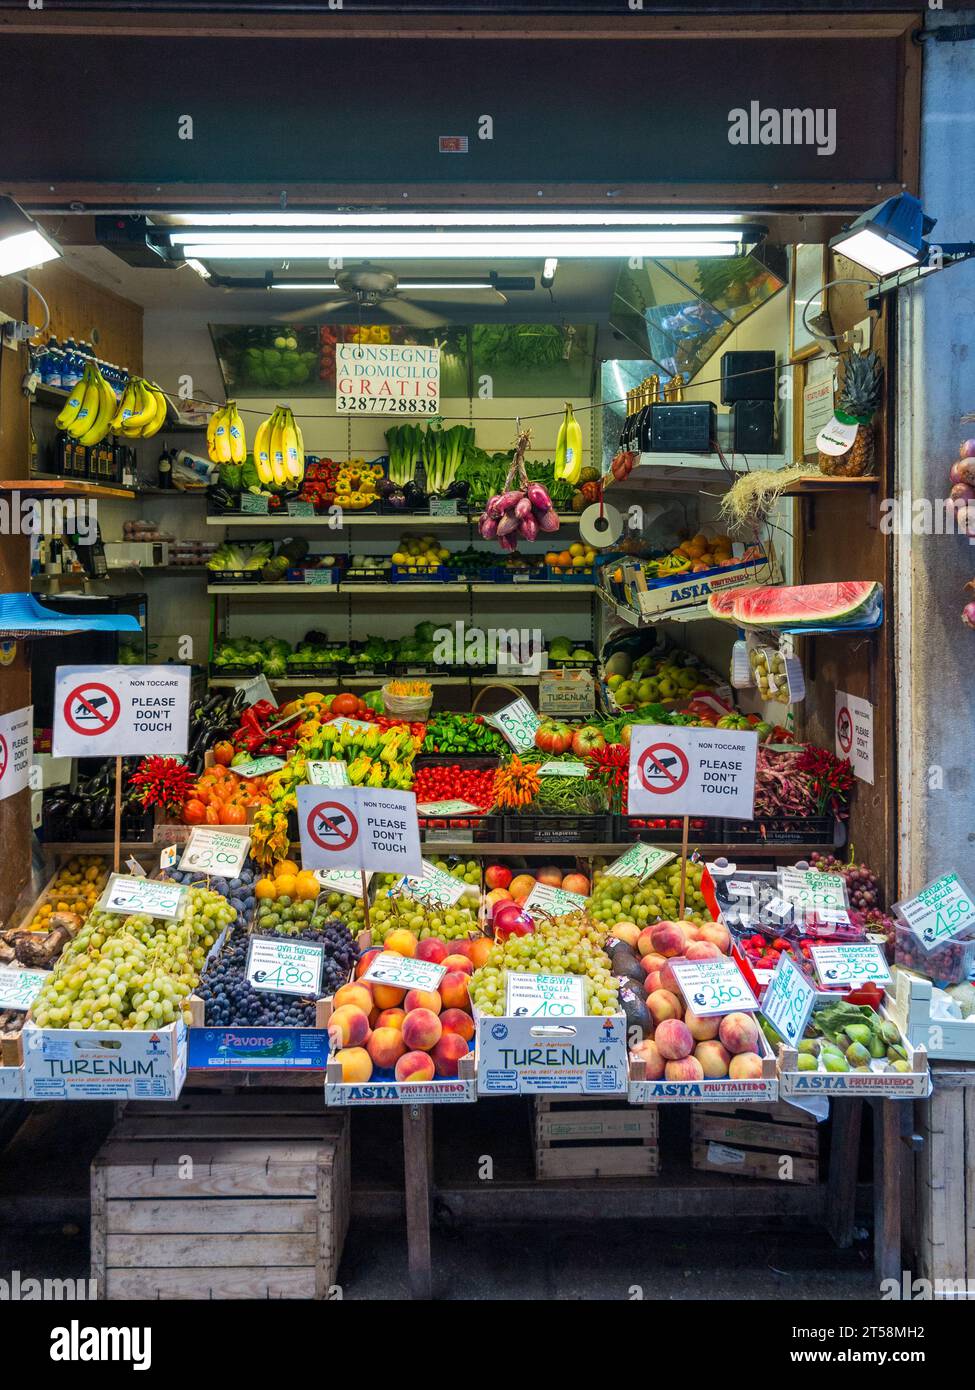 A display of fruit and vegetables from a merchant in Venice. Signs indicate that you must not touch the merchandise. The interior of the store is lit Stock Photo